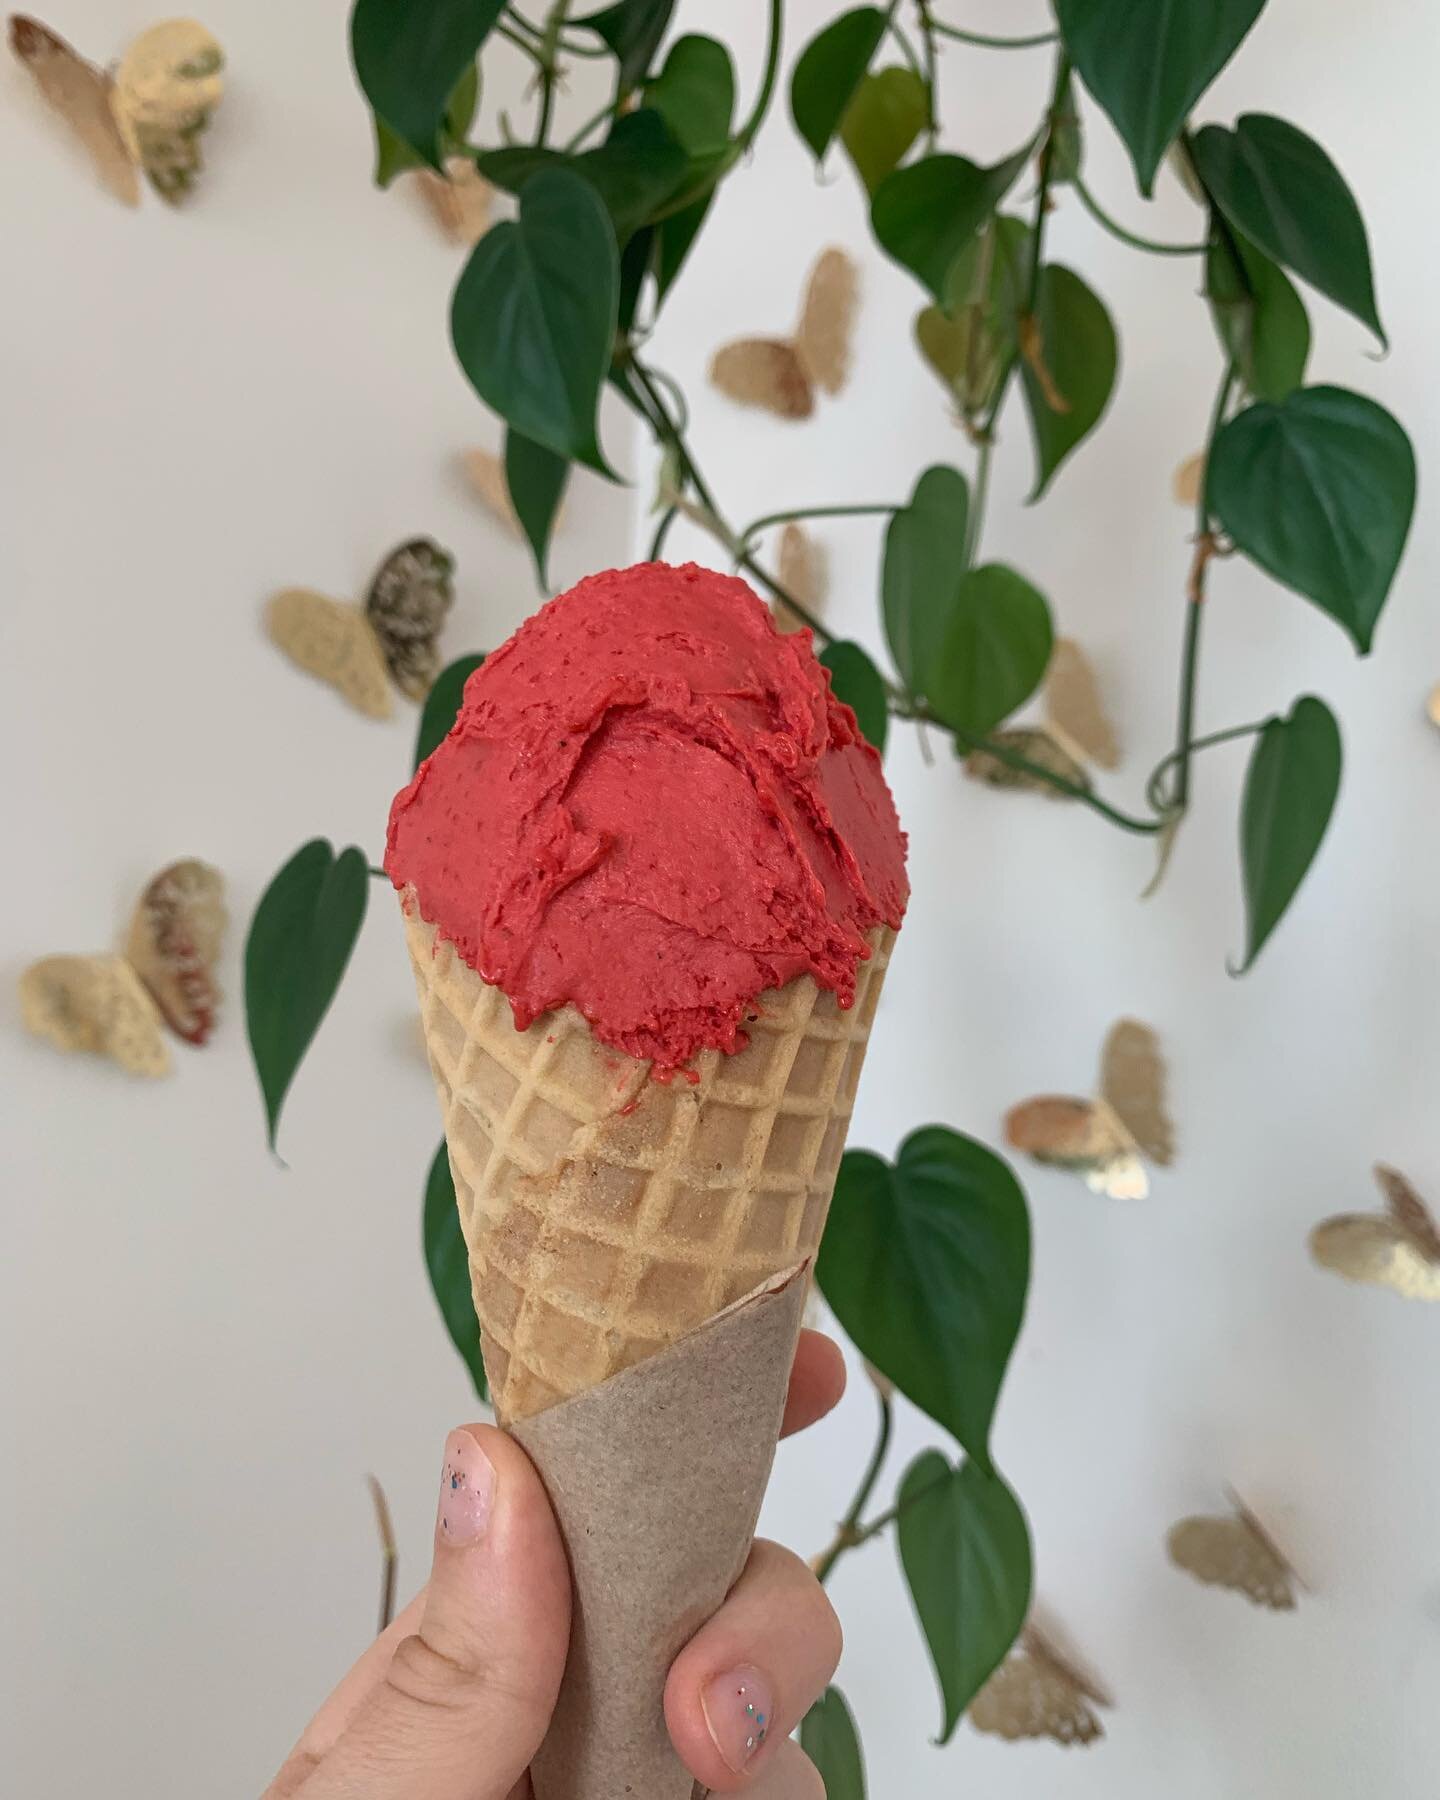 Our Raspberry Sorbet has to be the most vibrant gelato from all our flavors! 💖
▫️ 100% free of artificial coloring 🌱
▫️ will definitely surprise you with its bold, slightly zingy taste 
.
.
#gelato #gelateria #fruit #naturallight #icecream #dessert